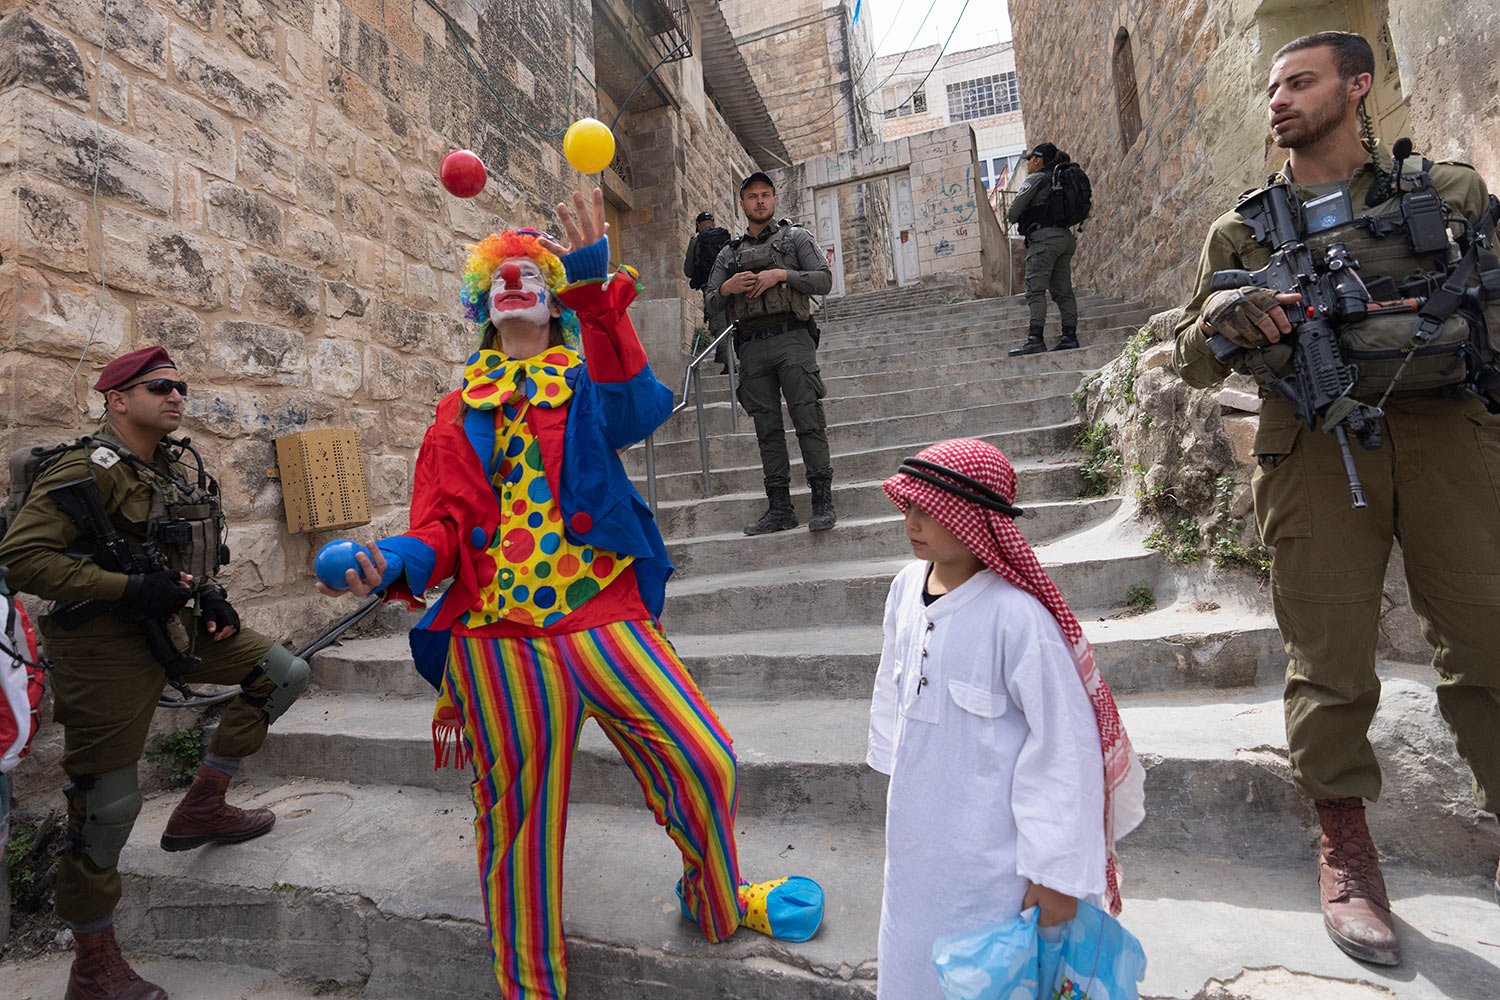  Jewish settlers dressed in costumes celebrate the Jewish holiday of Purim as soldiers secure the march in the West Bank city of Hebron, Tuesday, March 7, 2023.  (AP Photo/Ohad Zwigenberg) 